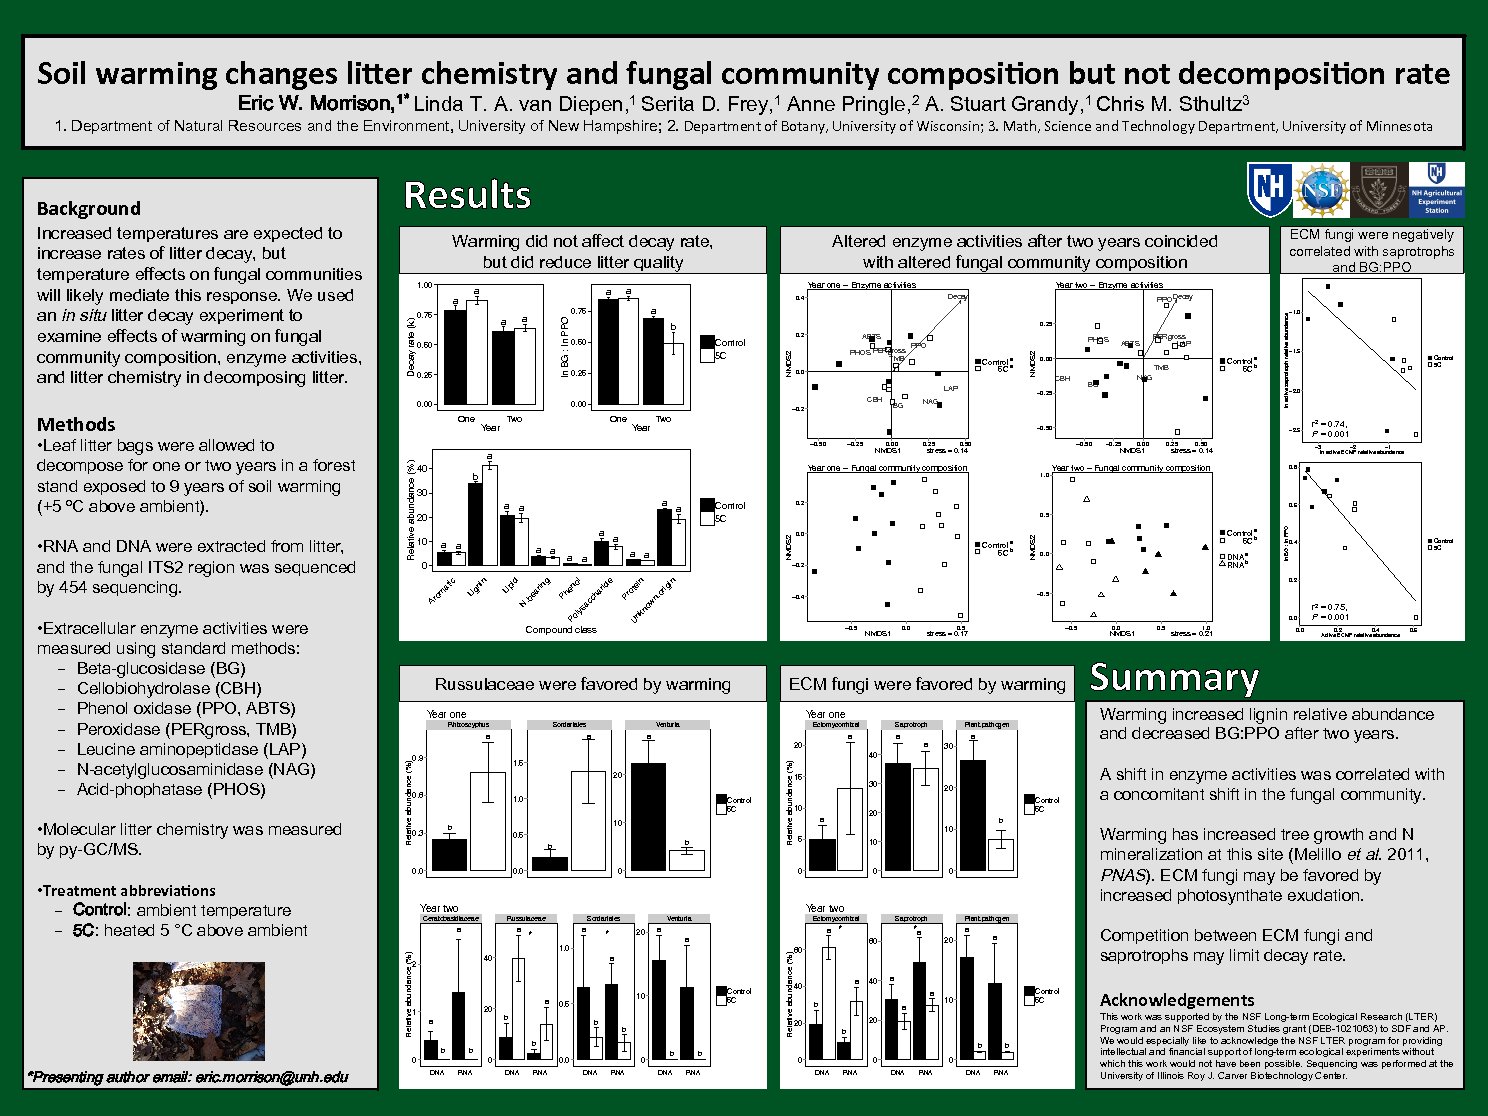 Soil Warming Changes Litter Chemistry And Fungal Community Composition But Not Decomposition Rate by ewj44